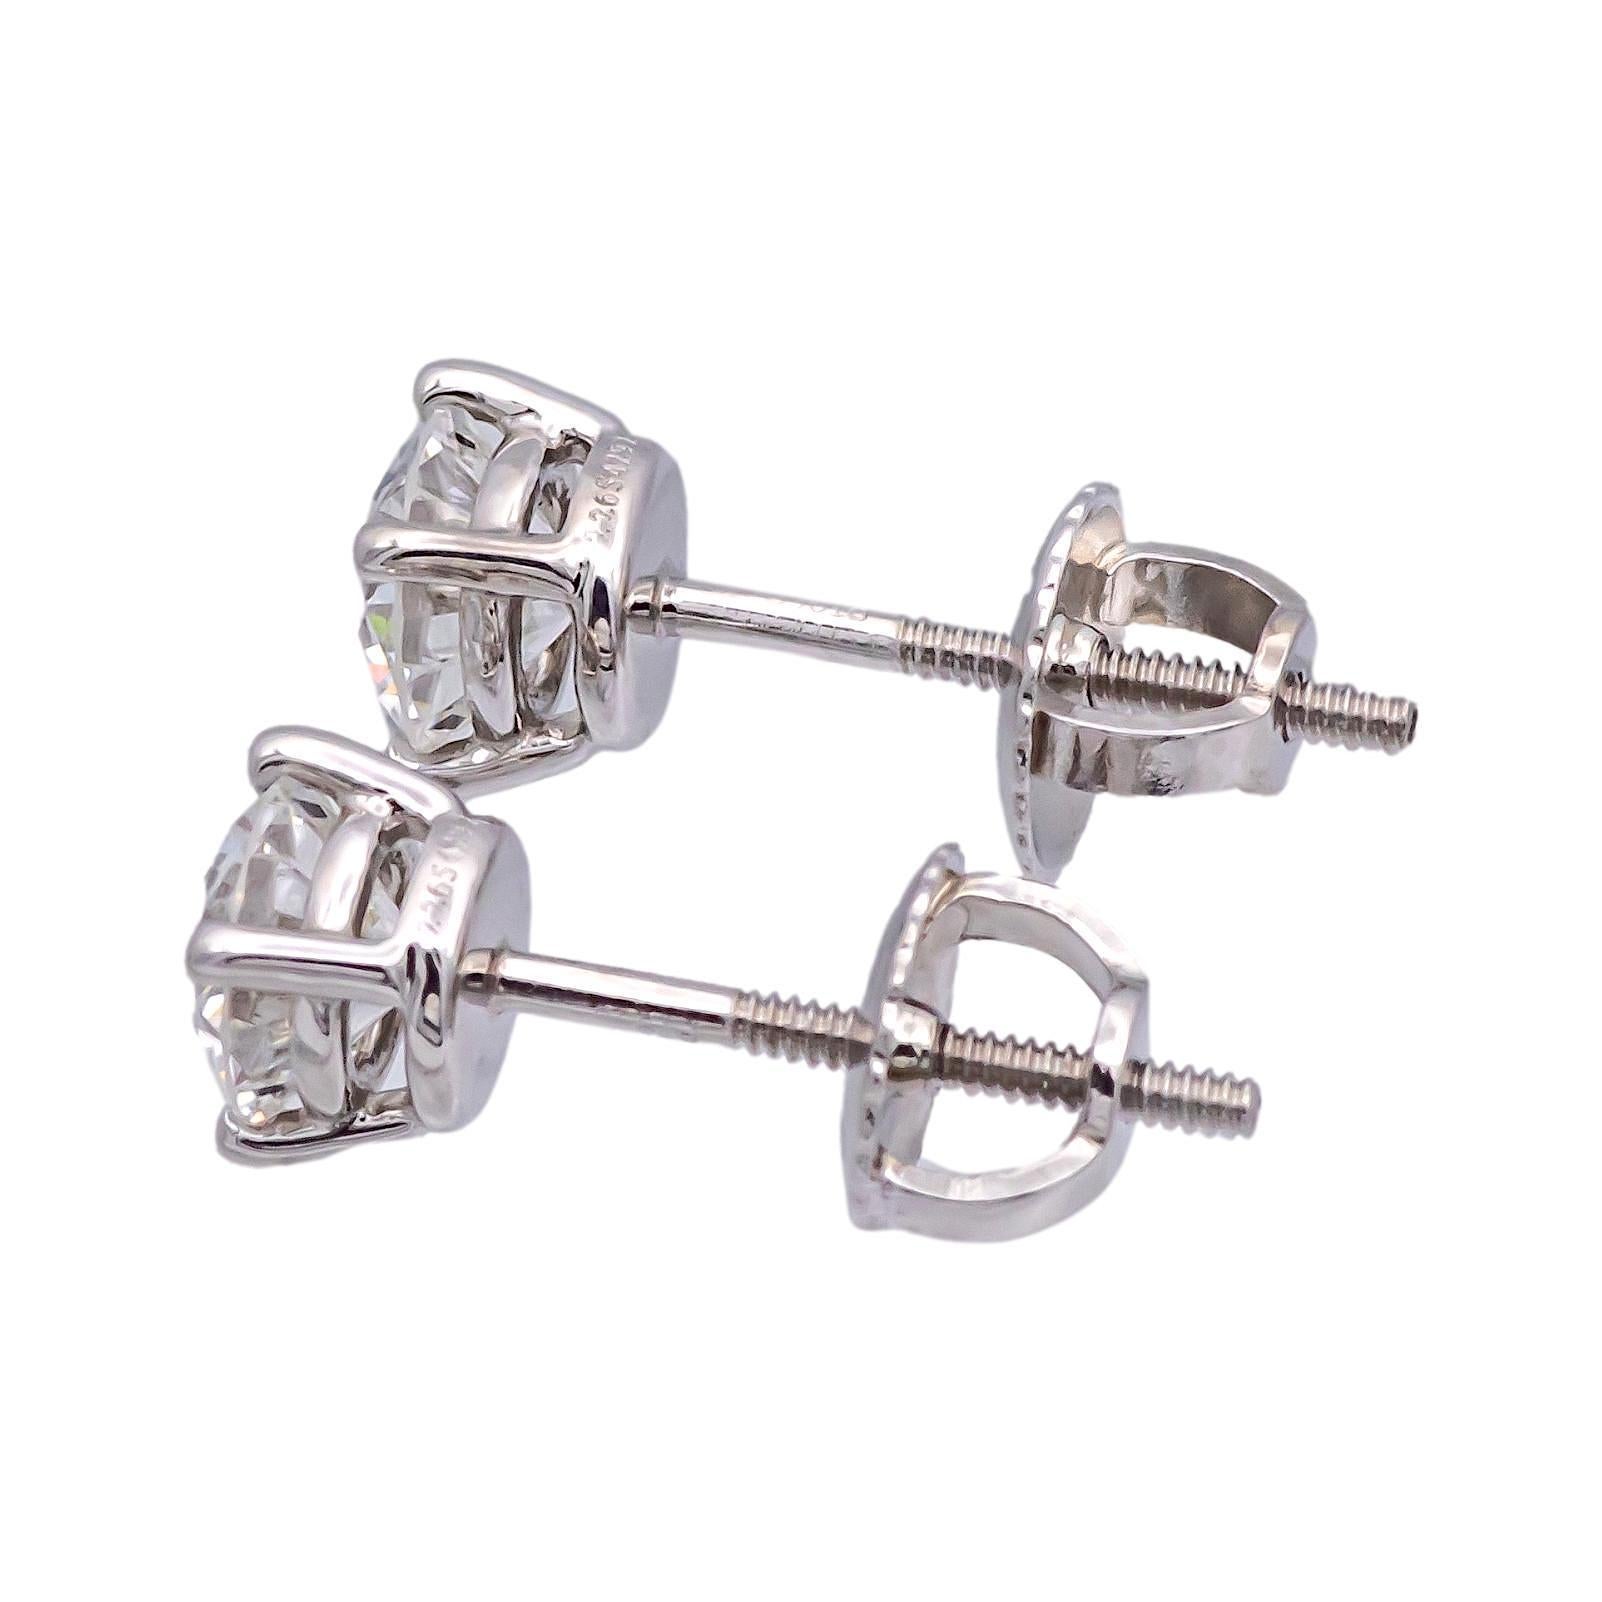 Pair of Tiffany & Co. Diamond Stud earrings finely crafted in a Platinum 4 prong basket setting featuring two perfectly matched round brilliant cut diamonds weighing 0.95 carats total weight. One round brilliant diamond weighs 0.47 carats graded G